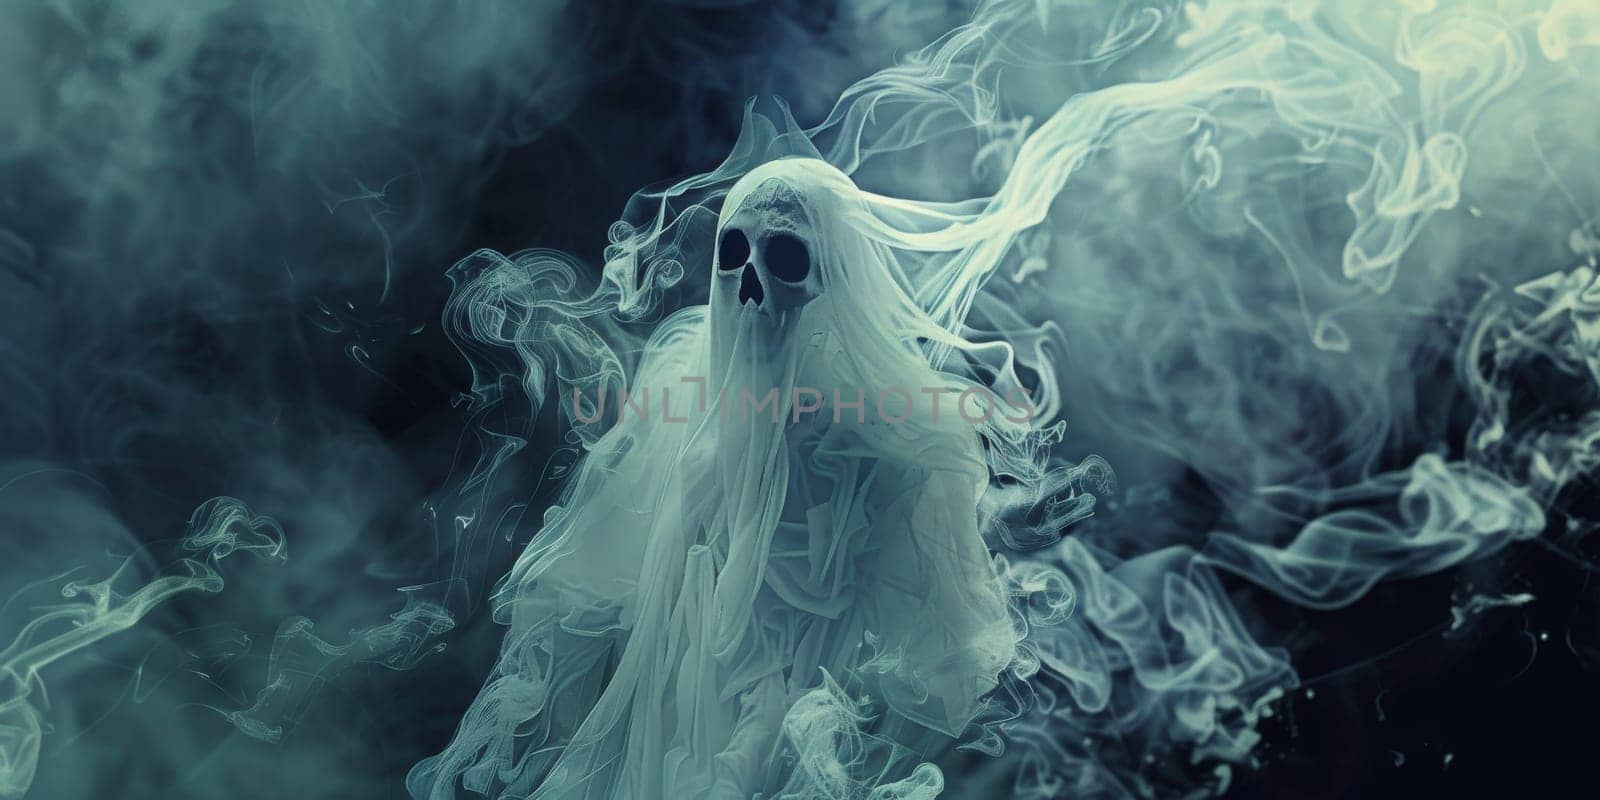 A ghostly ghost in a room filled with a fog by Kadula